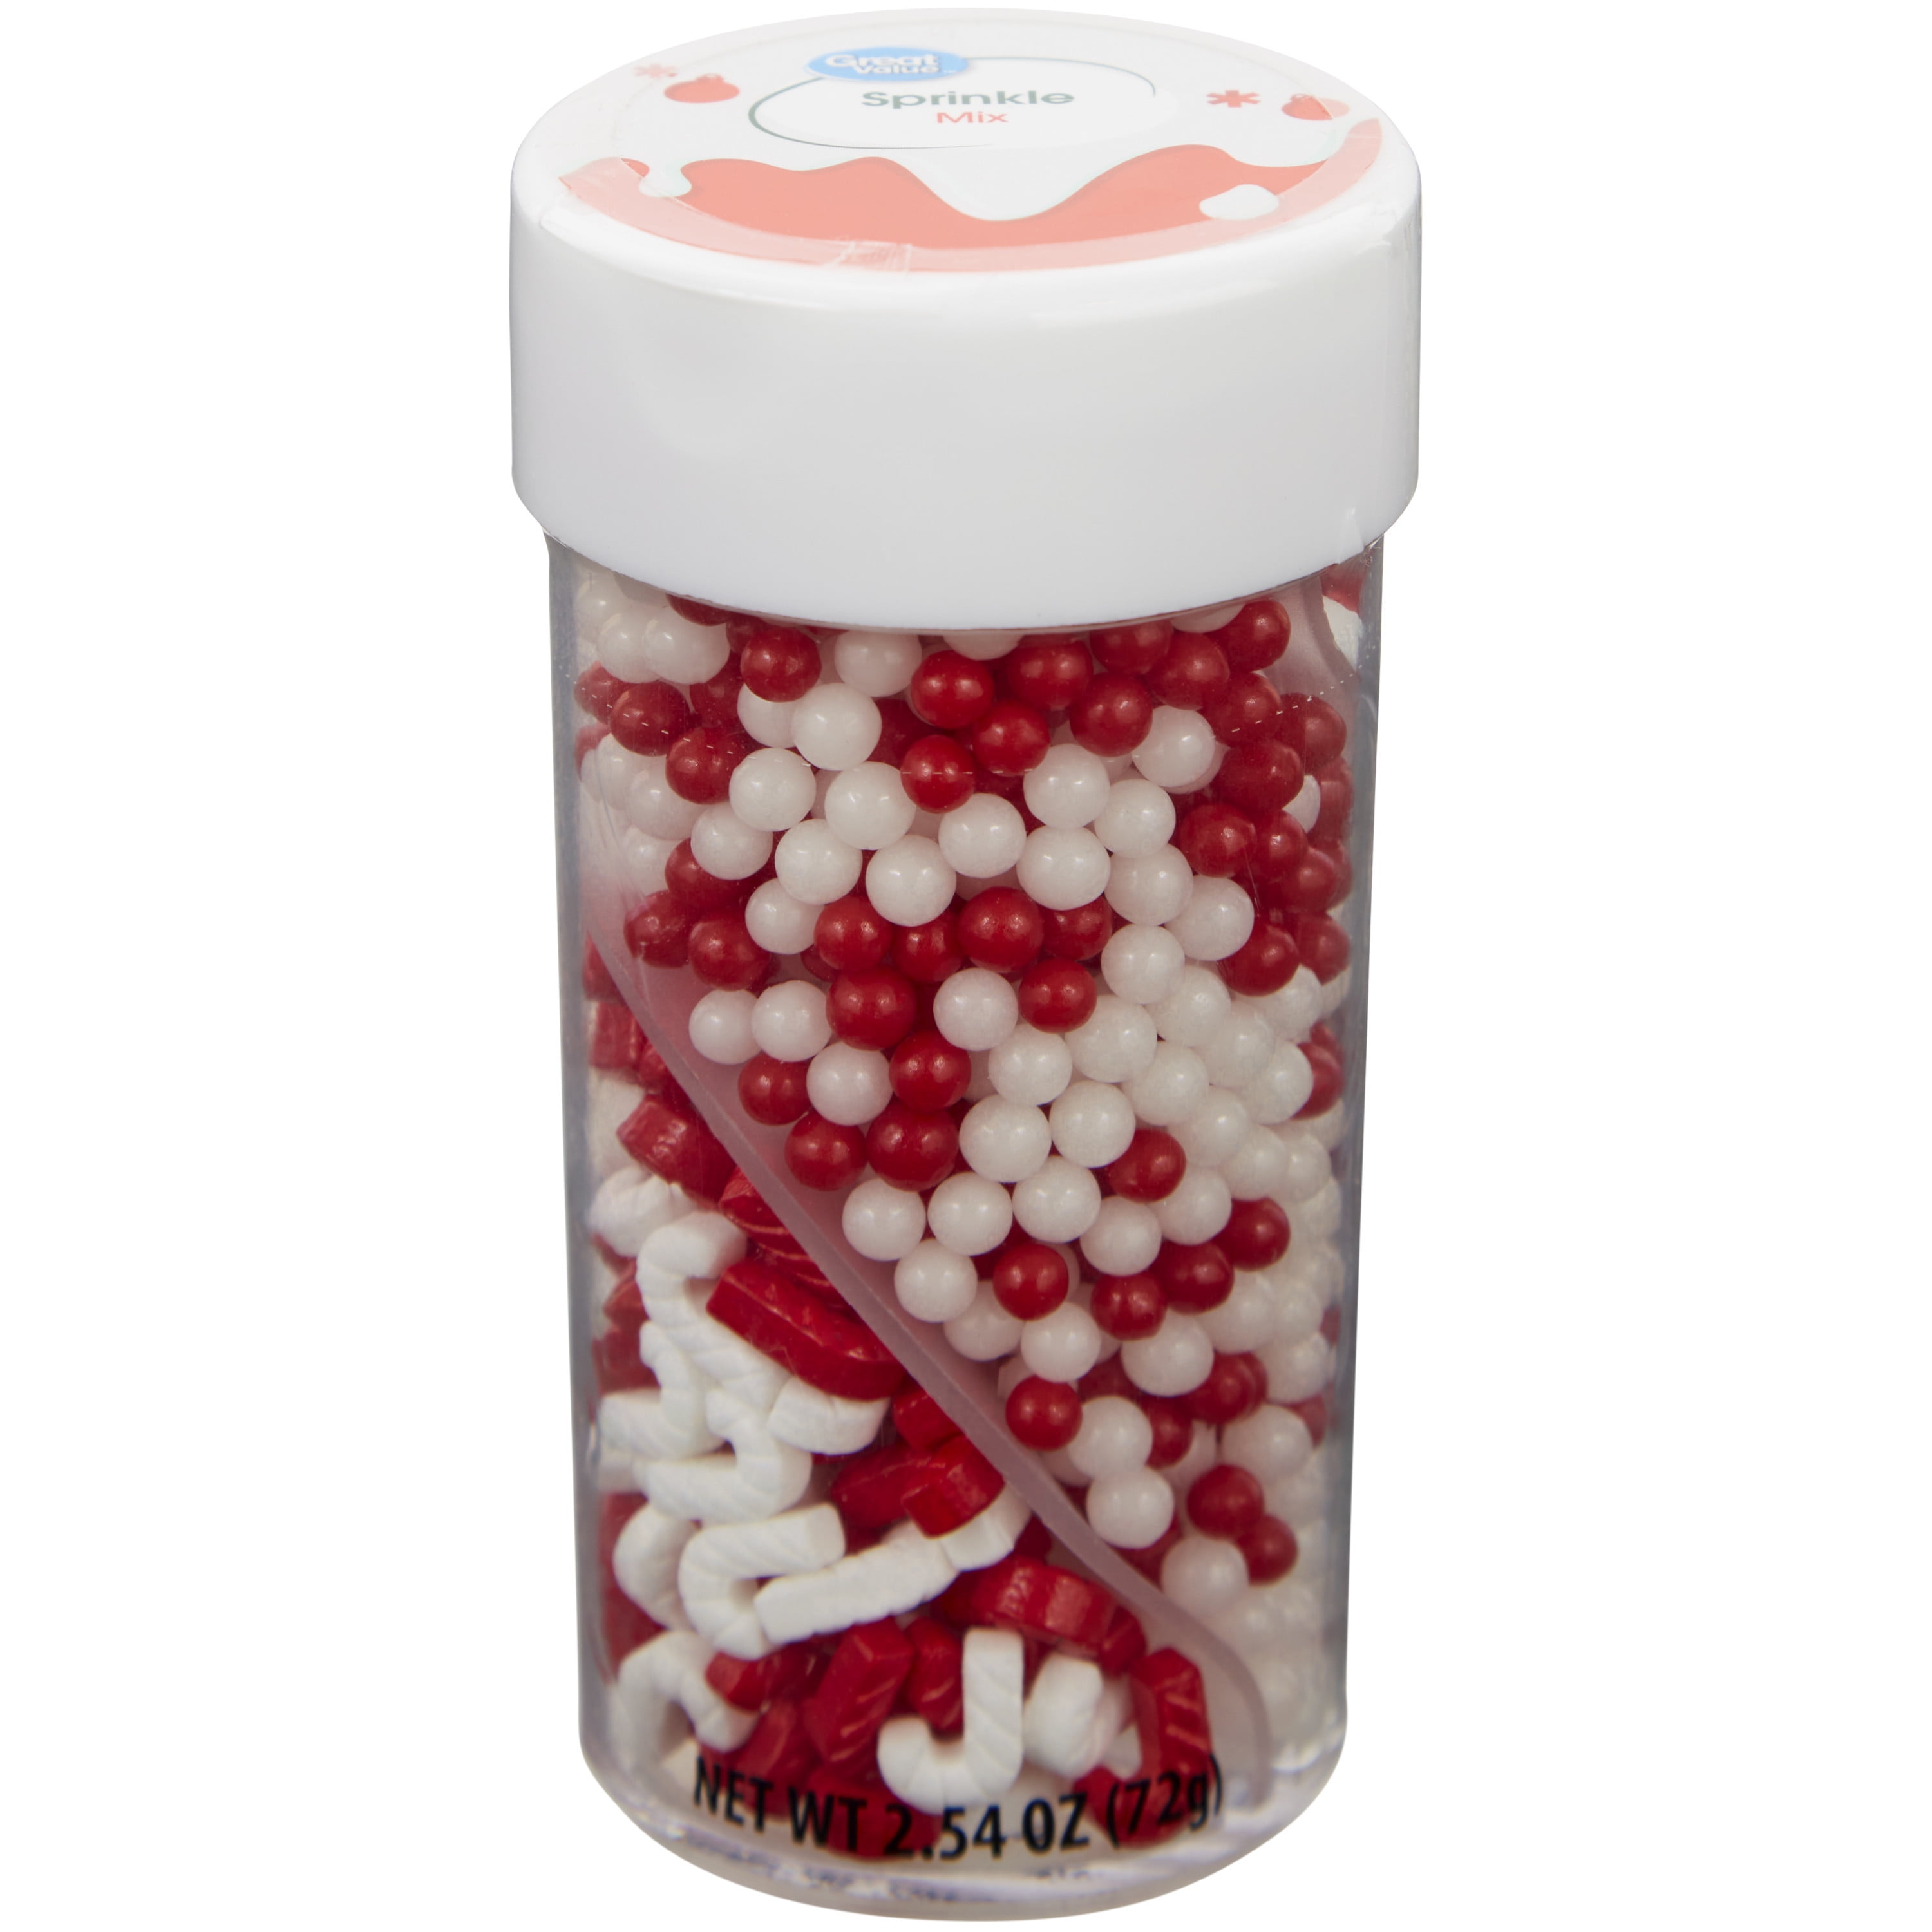 Great Value Christmas Candy Cane and Nonpareils Sprinkles Twist Bottle, 2.54 oz.